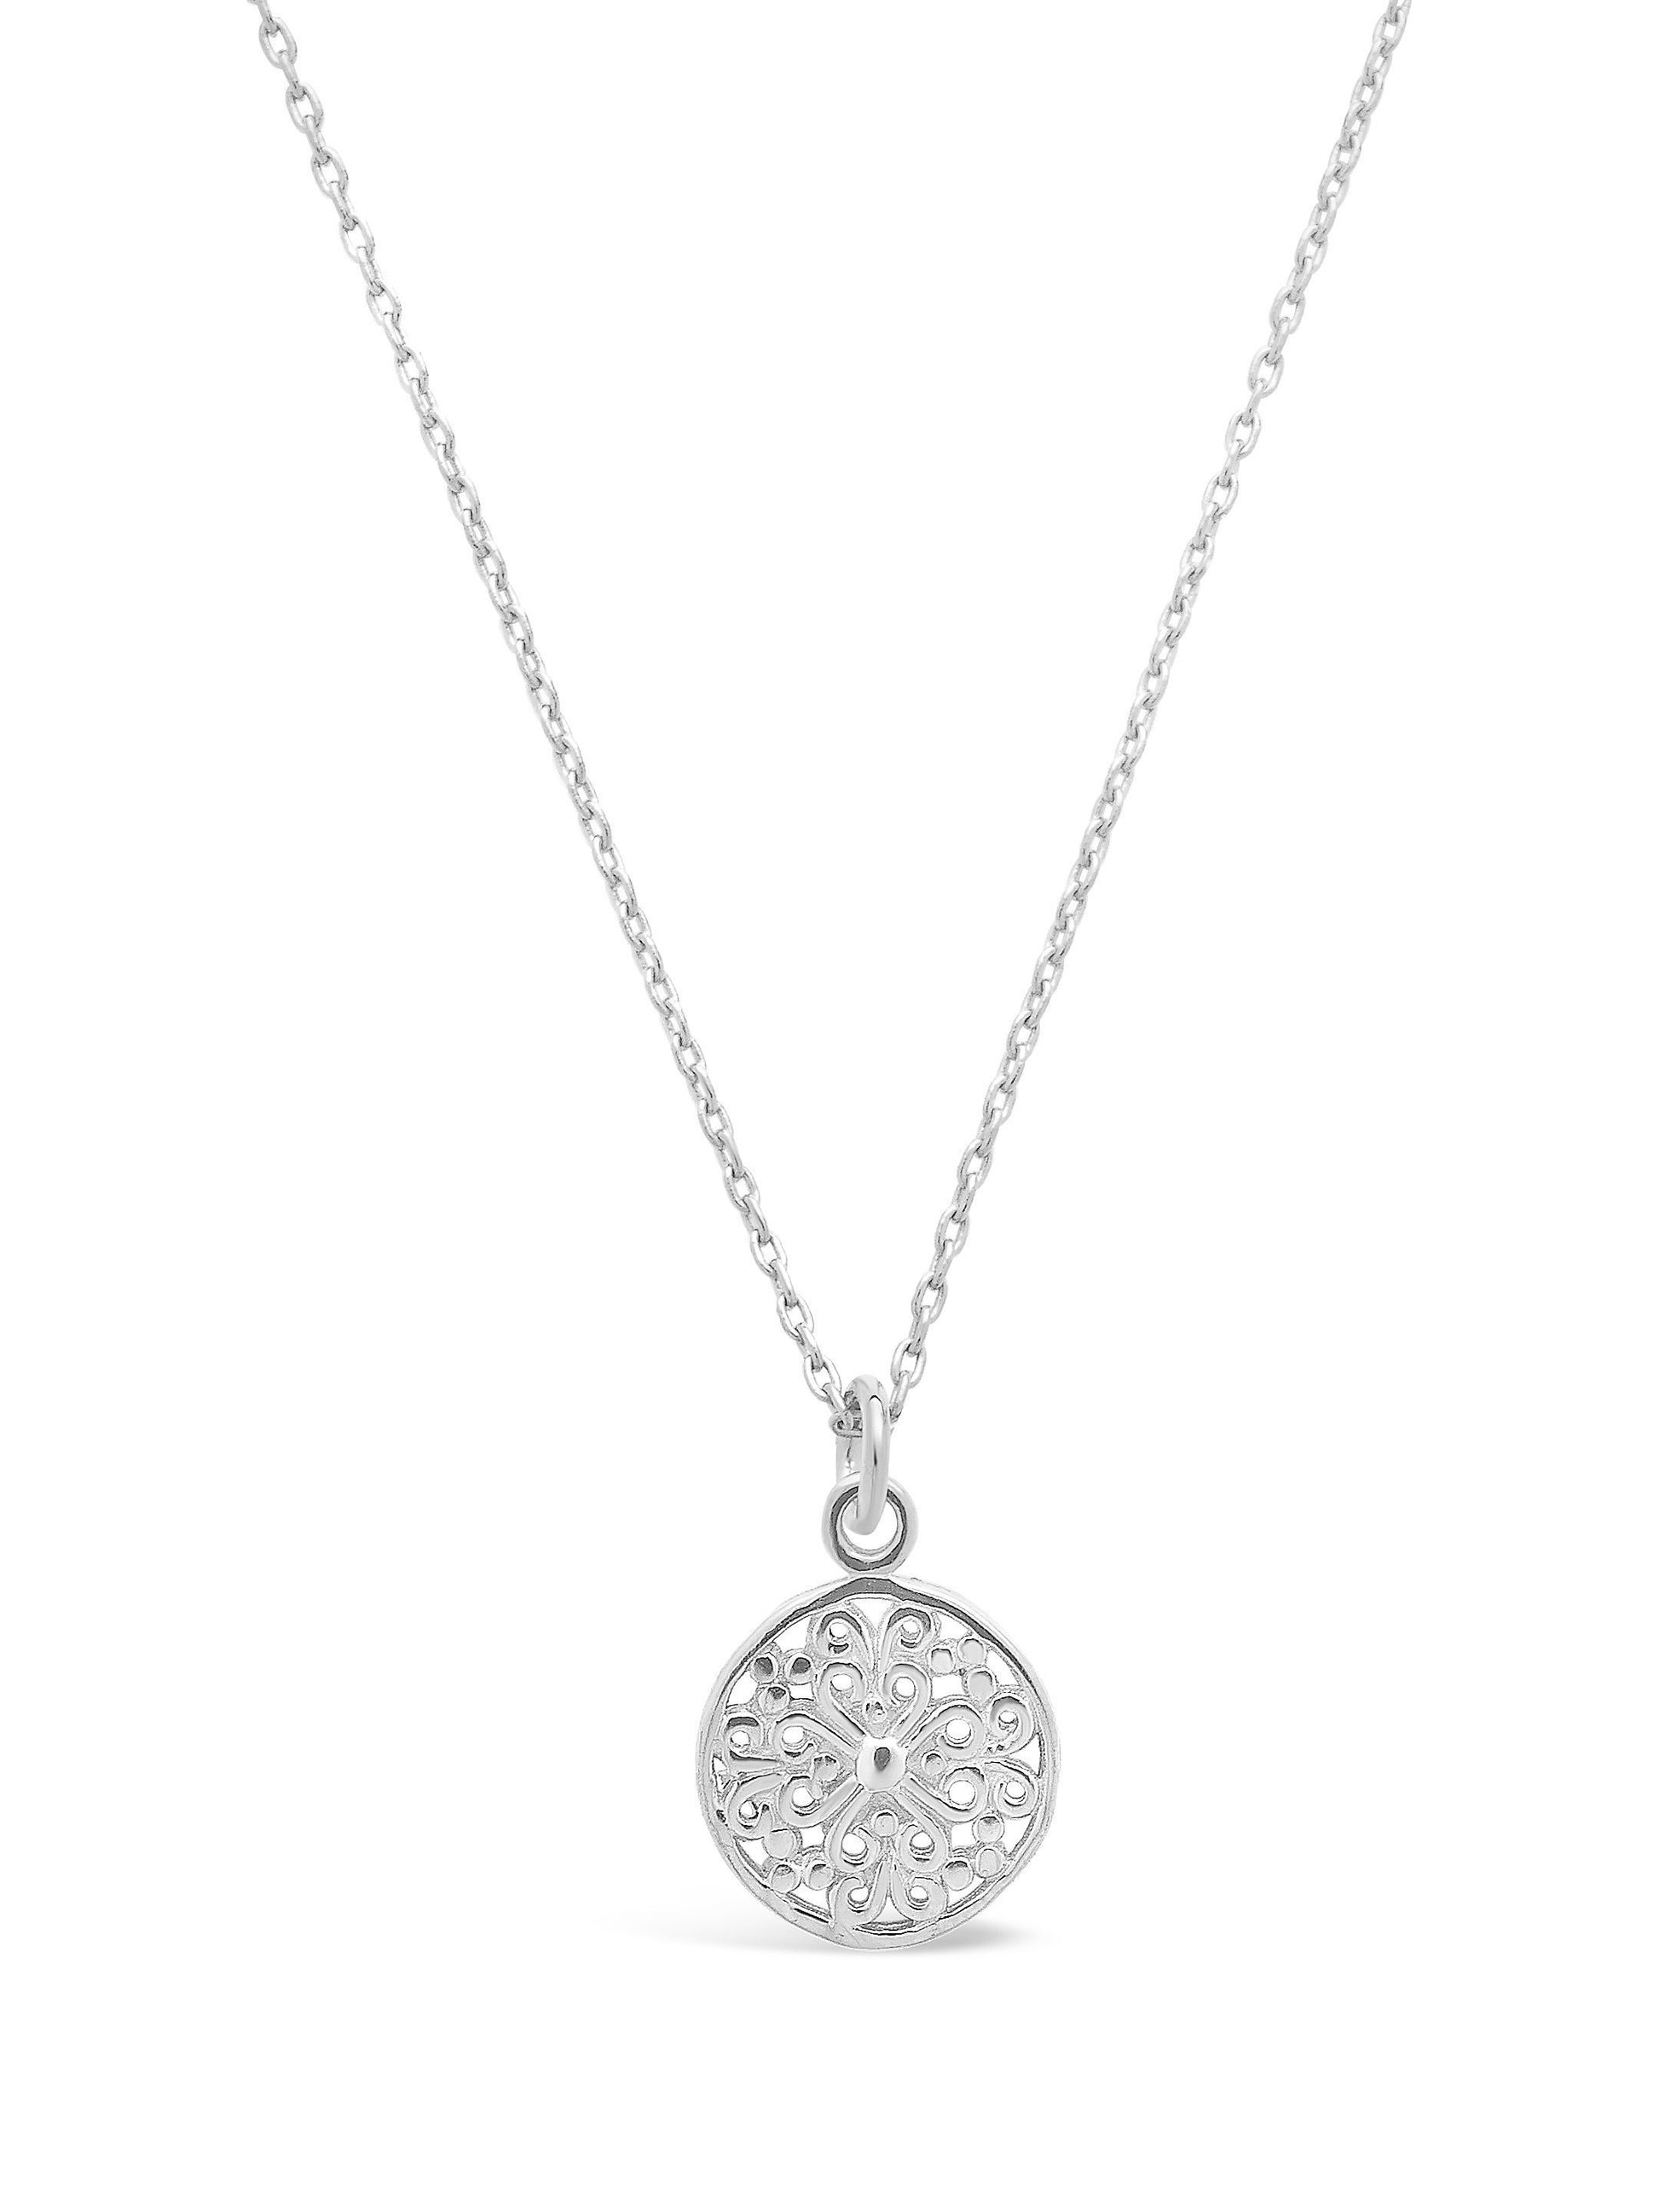 SHINE by Sterling Forever Sterling Silver Intricate Cutout Disk Pendant Necklace Necklace SHINE by Sterling Forever Silver 